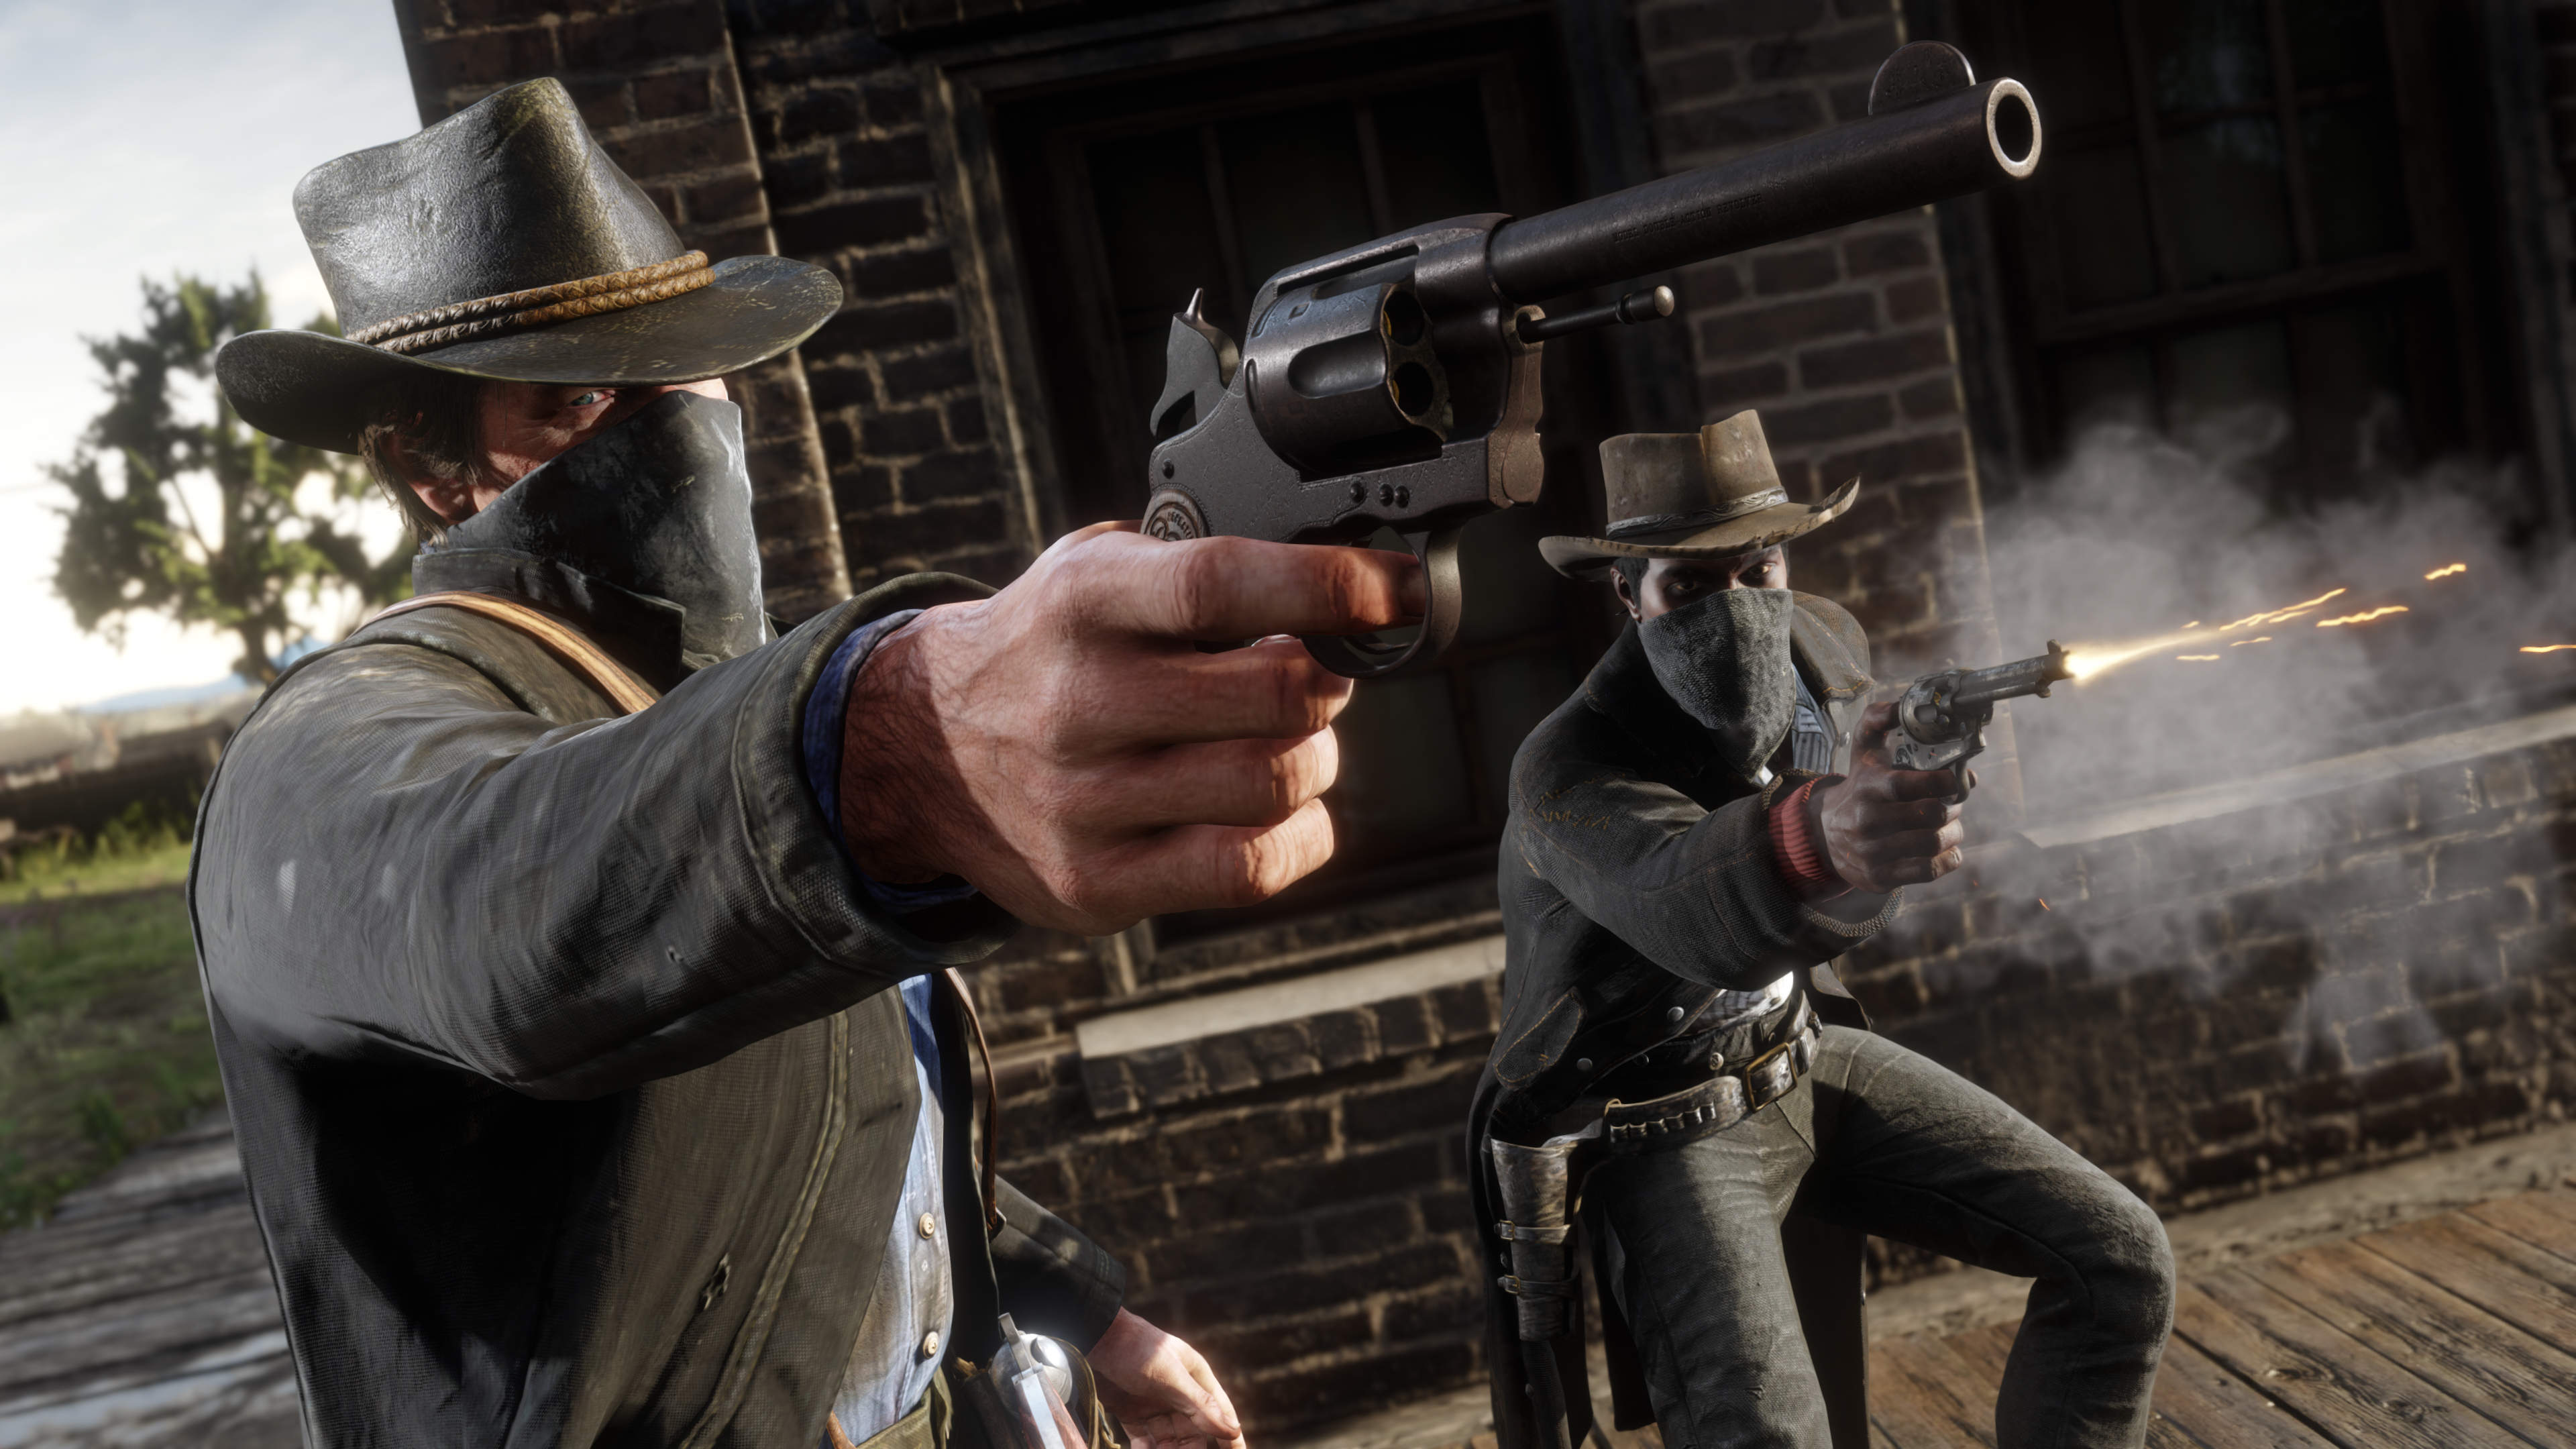 Rettidig Sentimental Landbrugs Red Dead Redemption 2 PC system requirements demand a ridiculous amount of  disk space | TechRadar